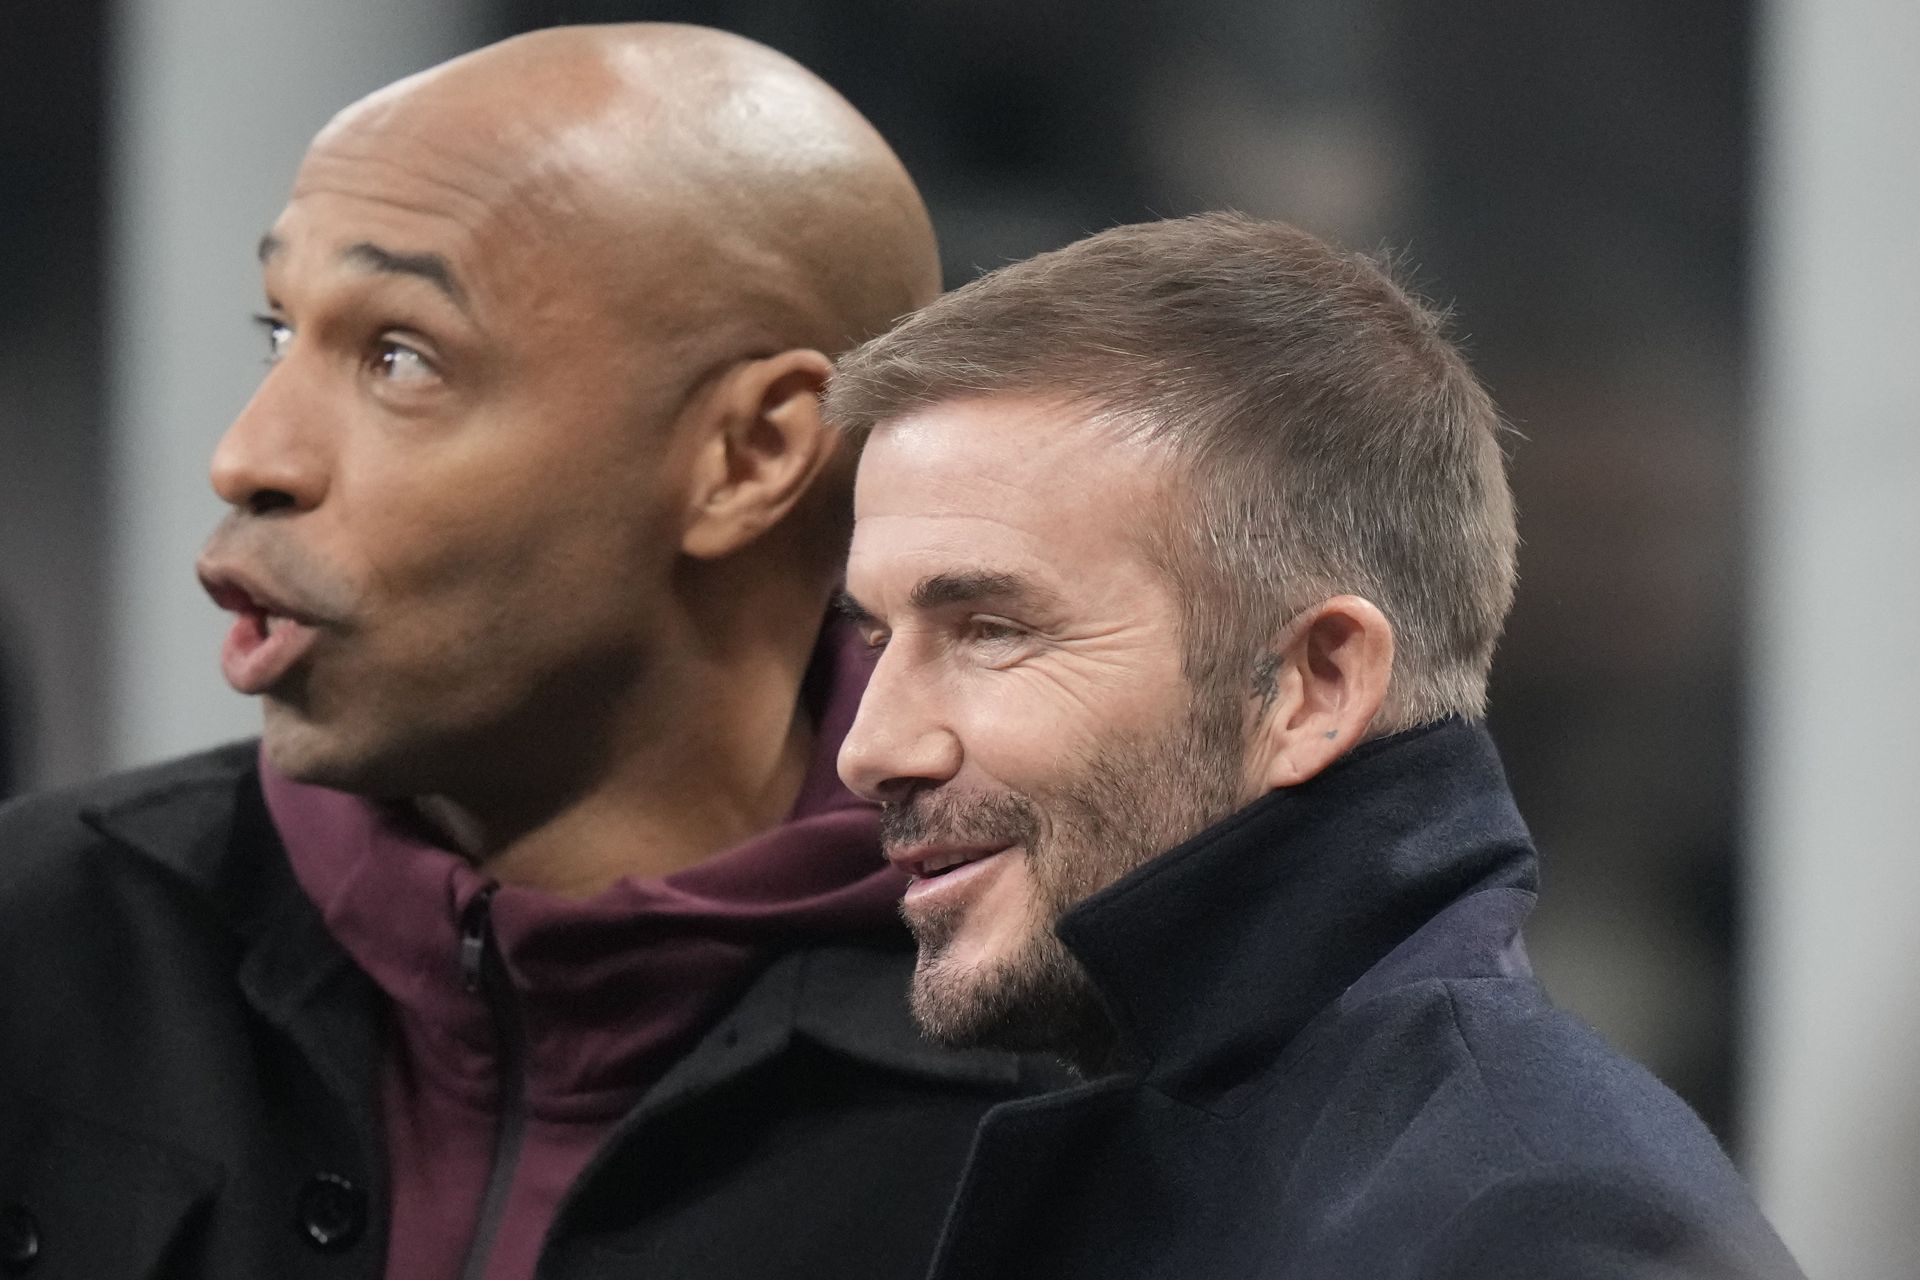 Thierry Henry (left) and David Beckham